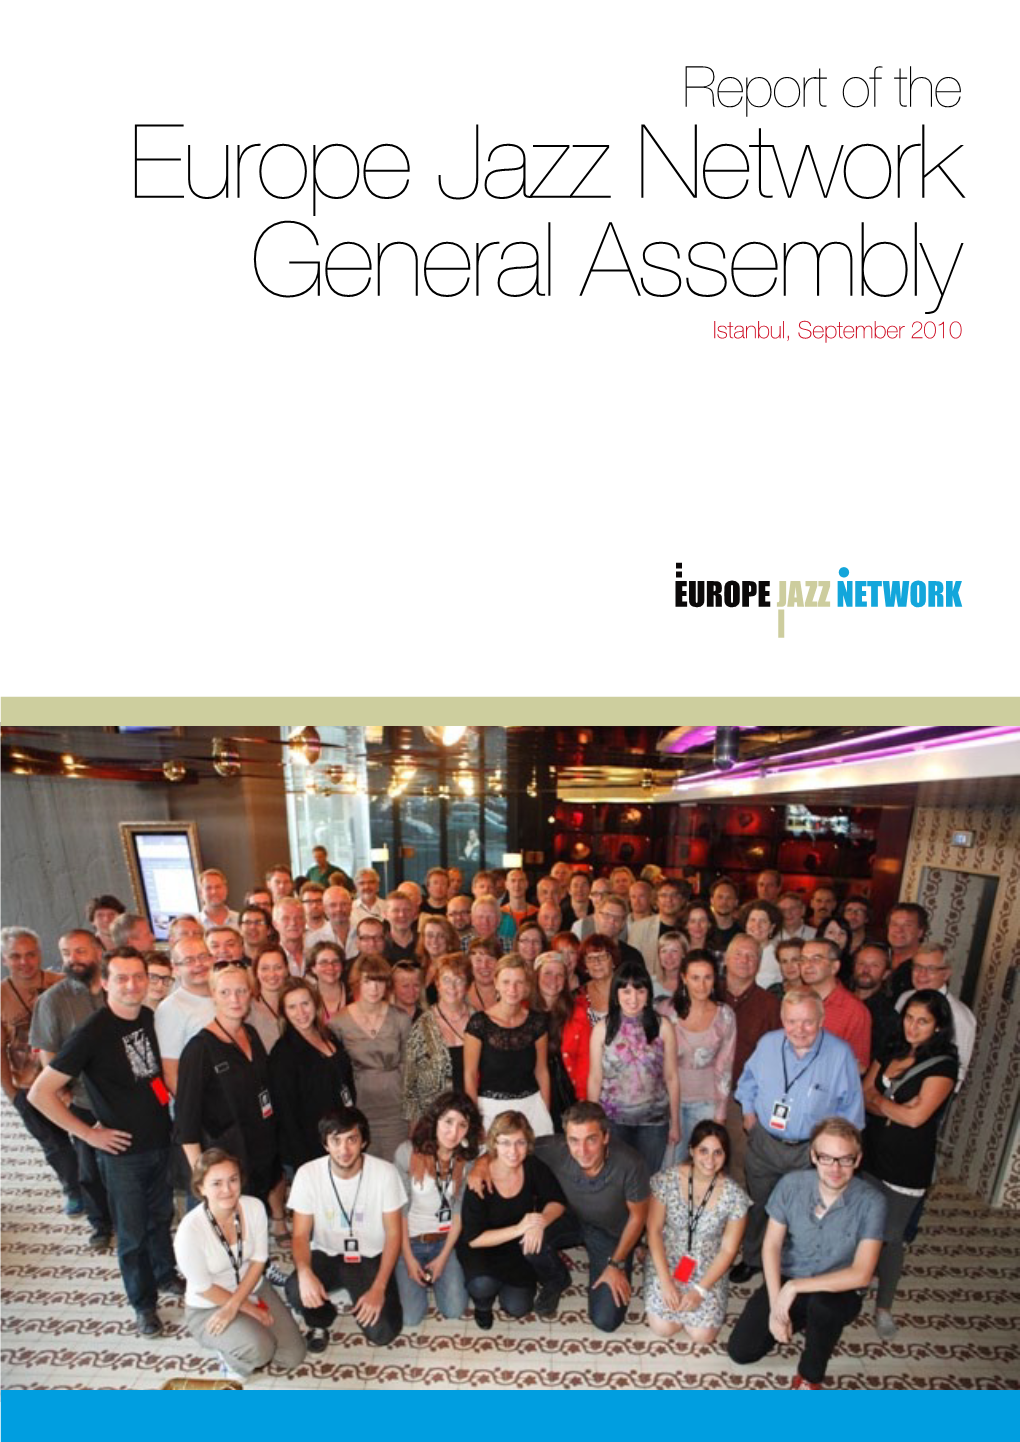 Europe Jazz Network General Assembly Istanbul, September 2010